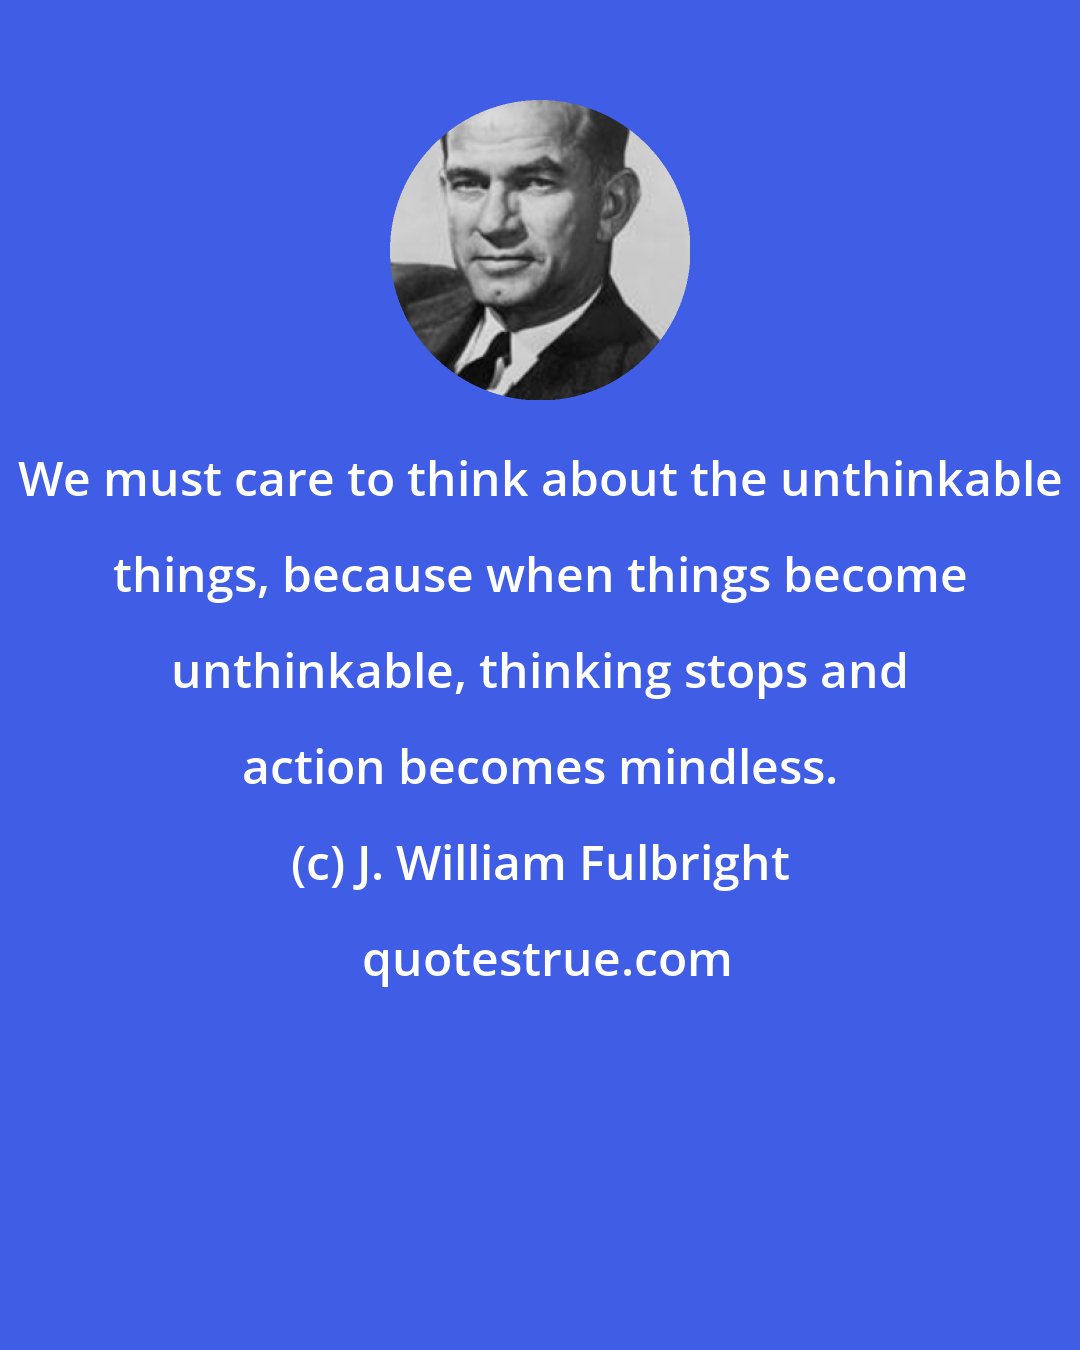 J. William Fulbright: We must care to think about the unthinkable things, because when things become unthinkable, thinking stops and action becomes mindless.